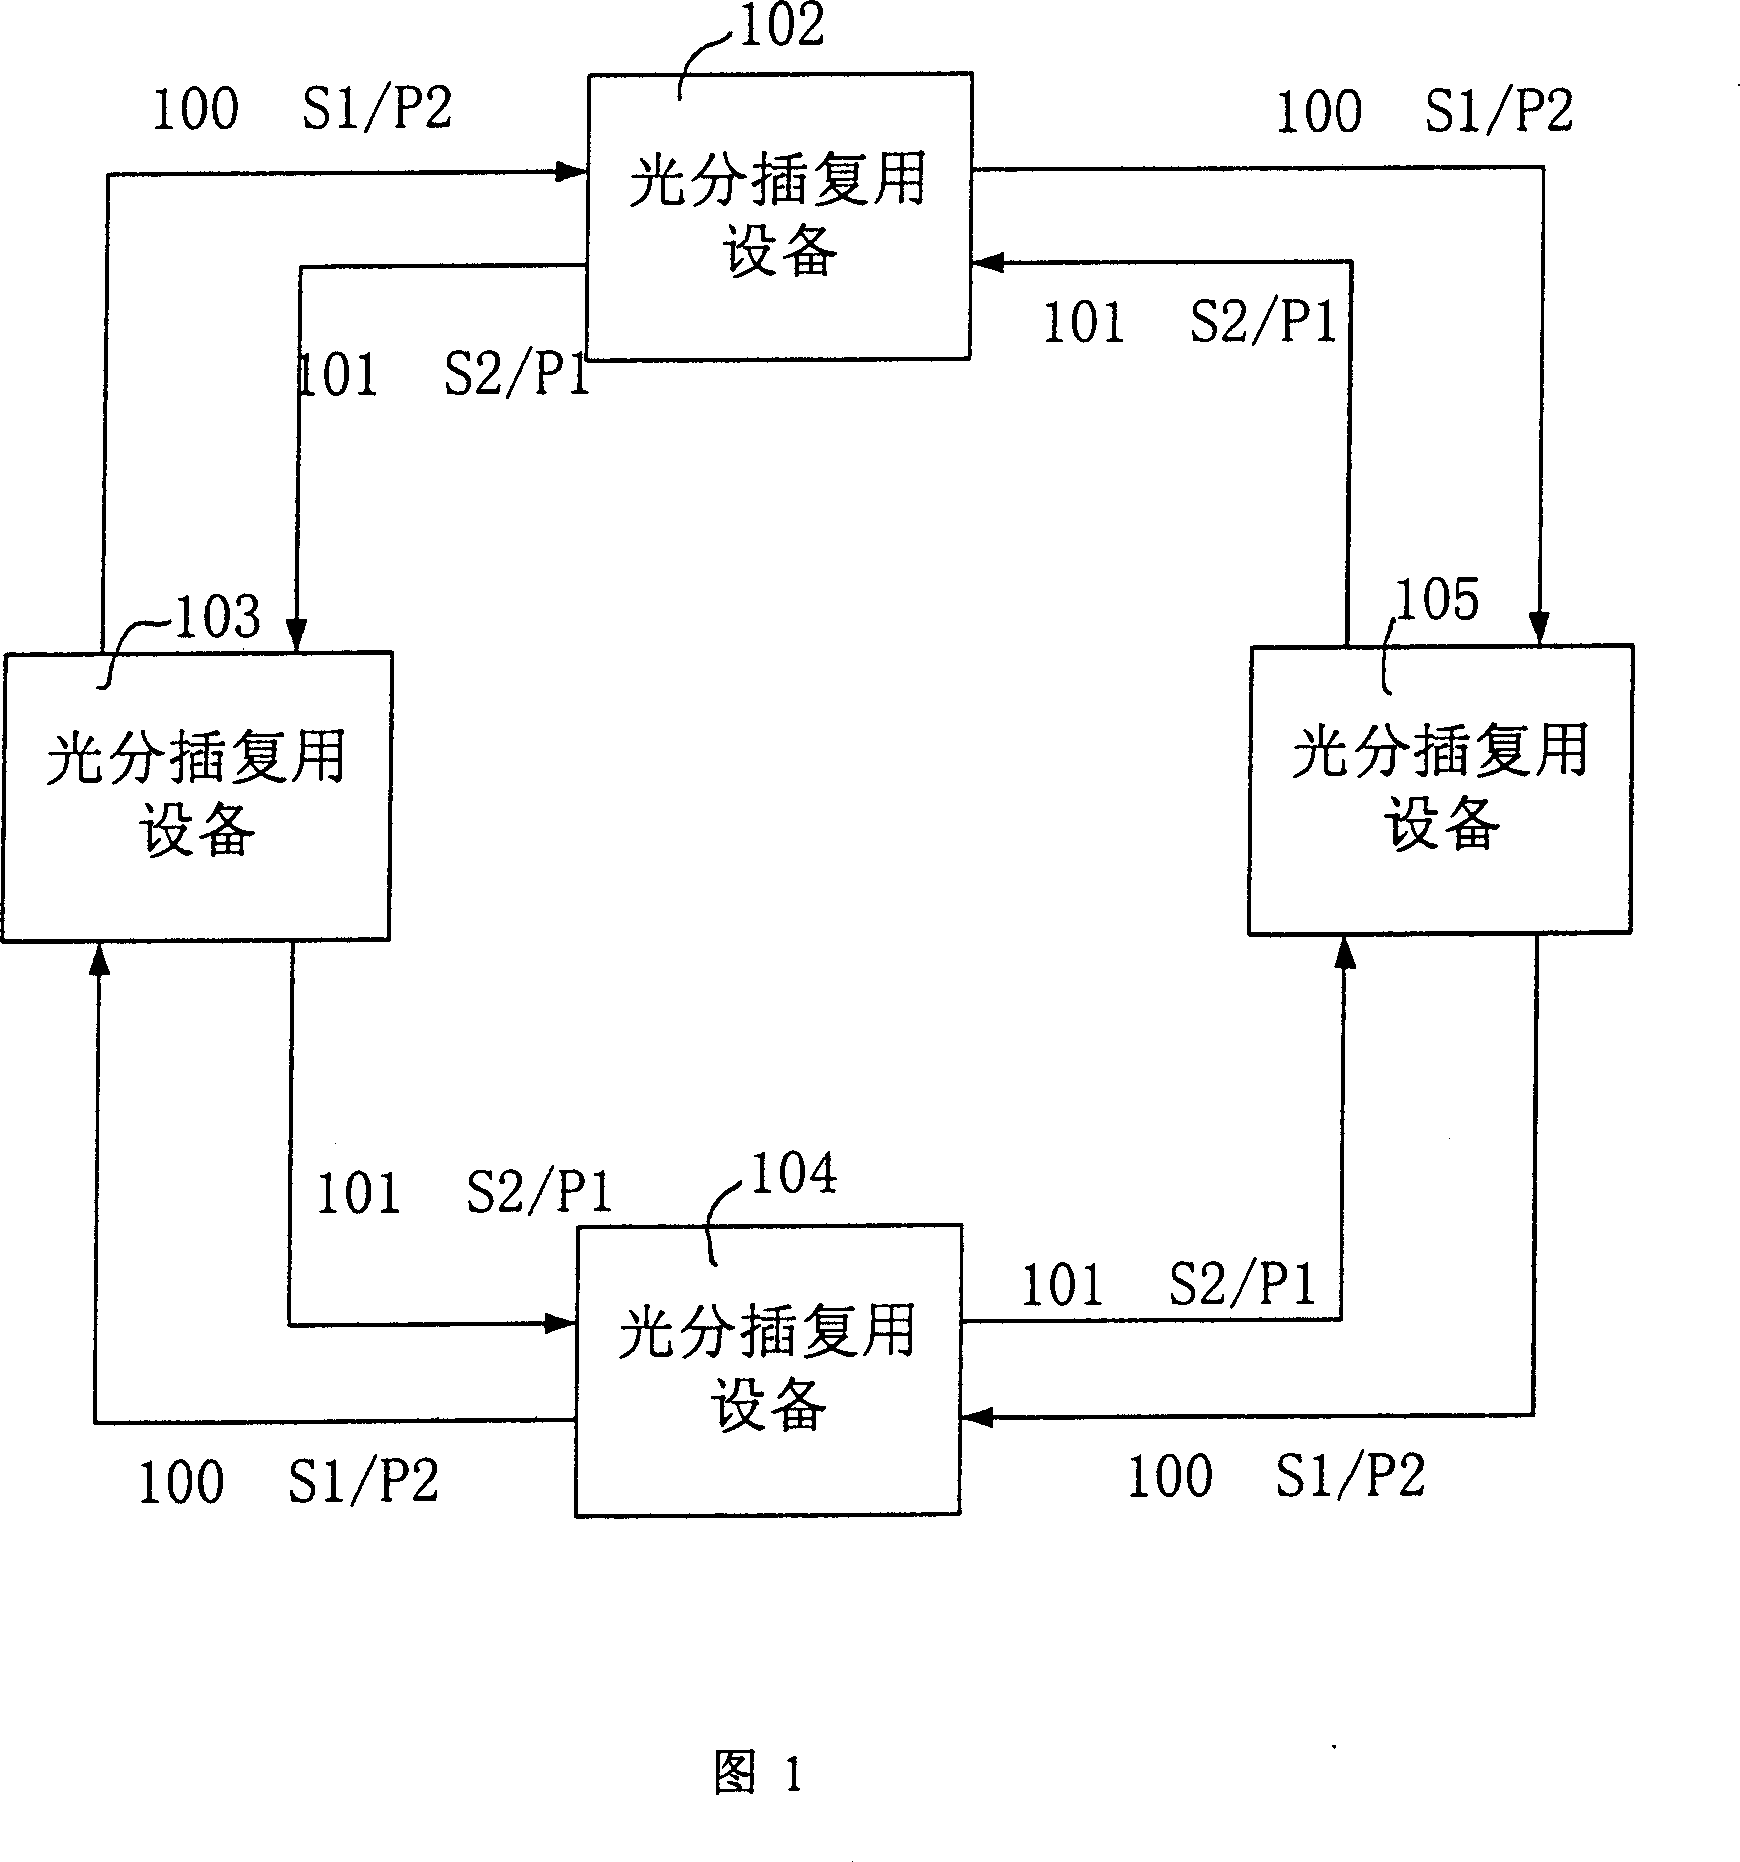 System of dual fibers two-way channel/multiplexing segment rotating loop for wavelength division multiplexing optical network